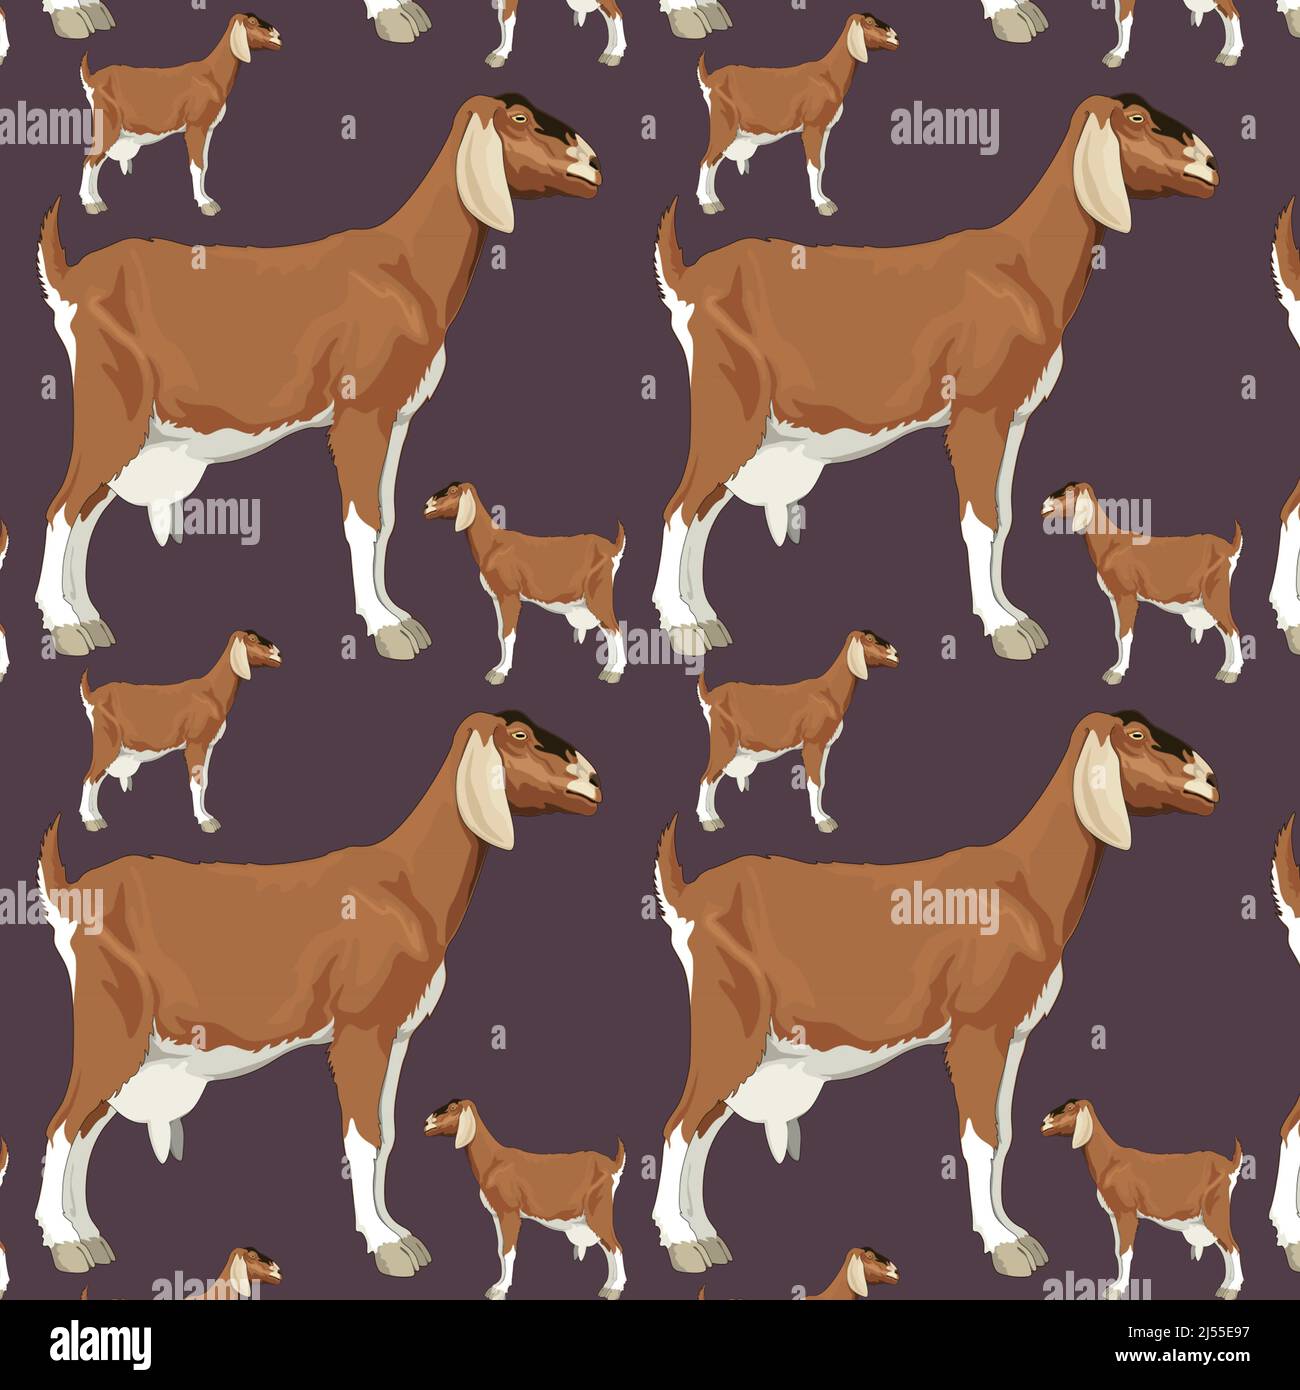 Goat pattern dark lavender background pattern for goat lovers and farm animal fans in this design element. Stock Photo